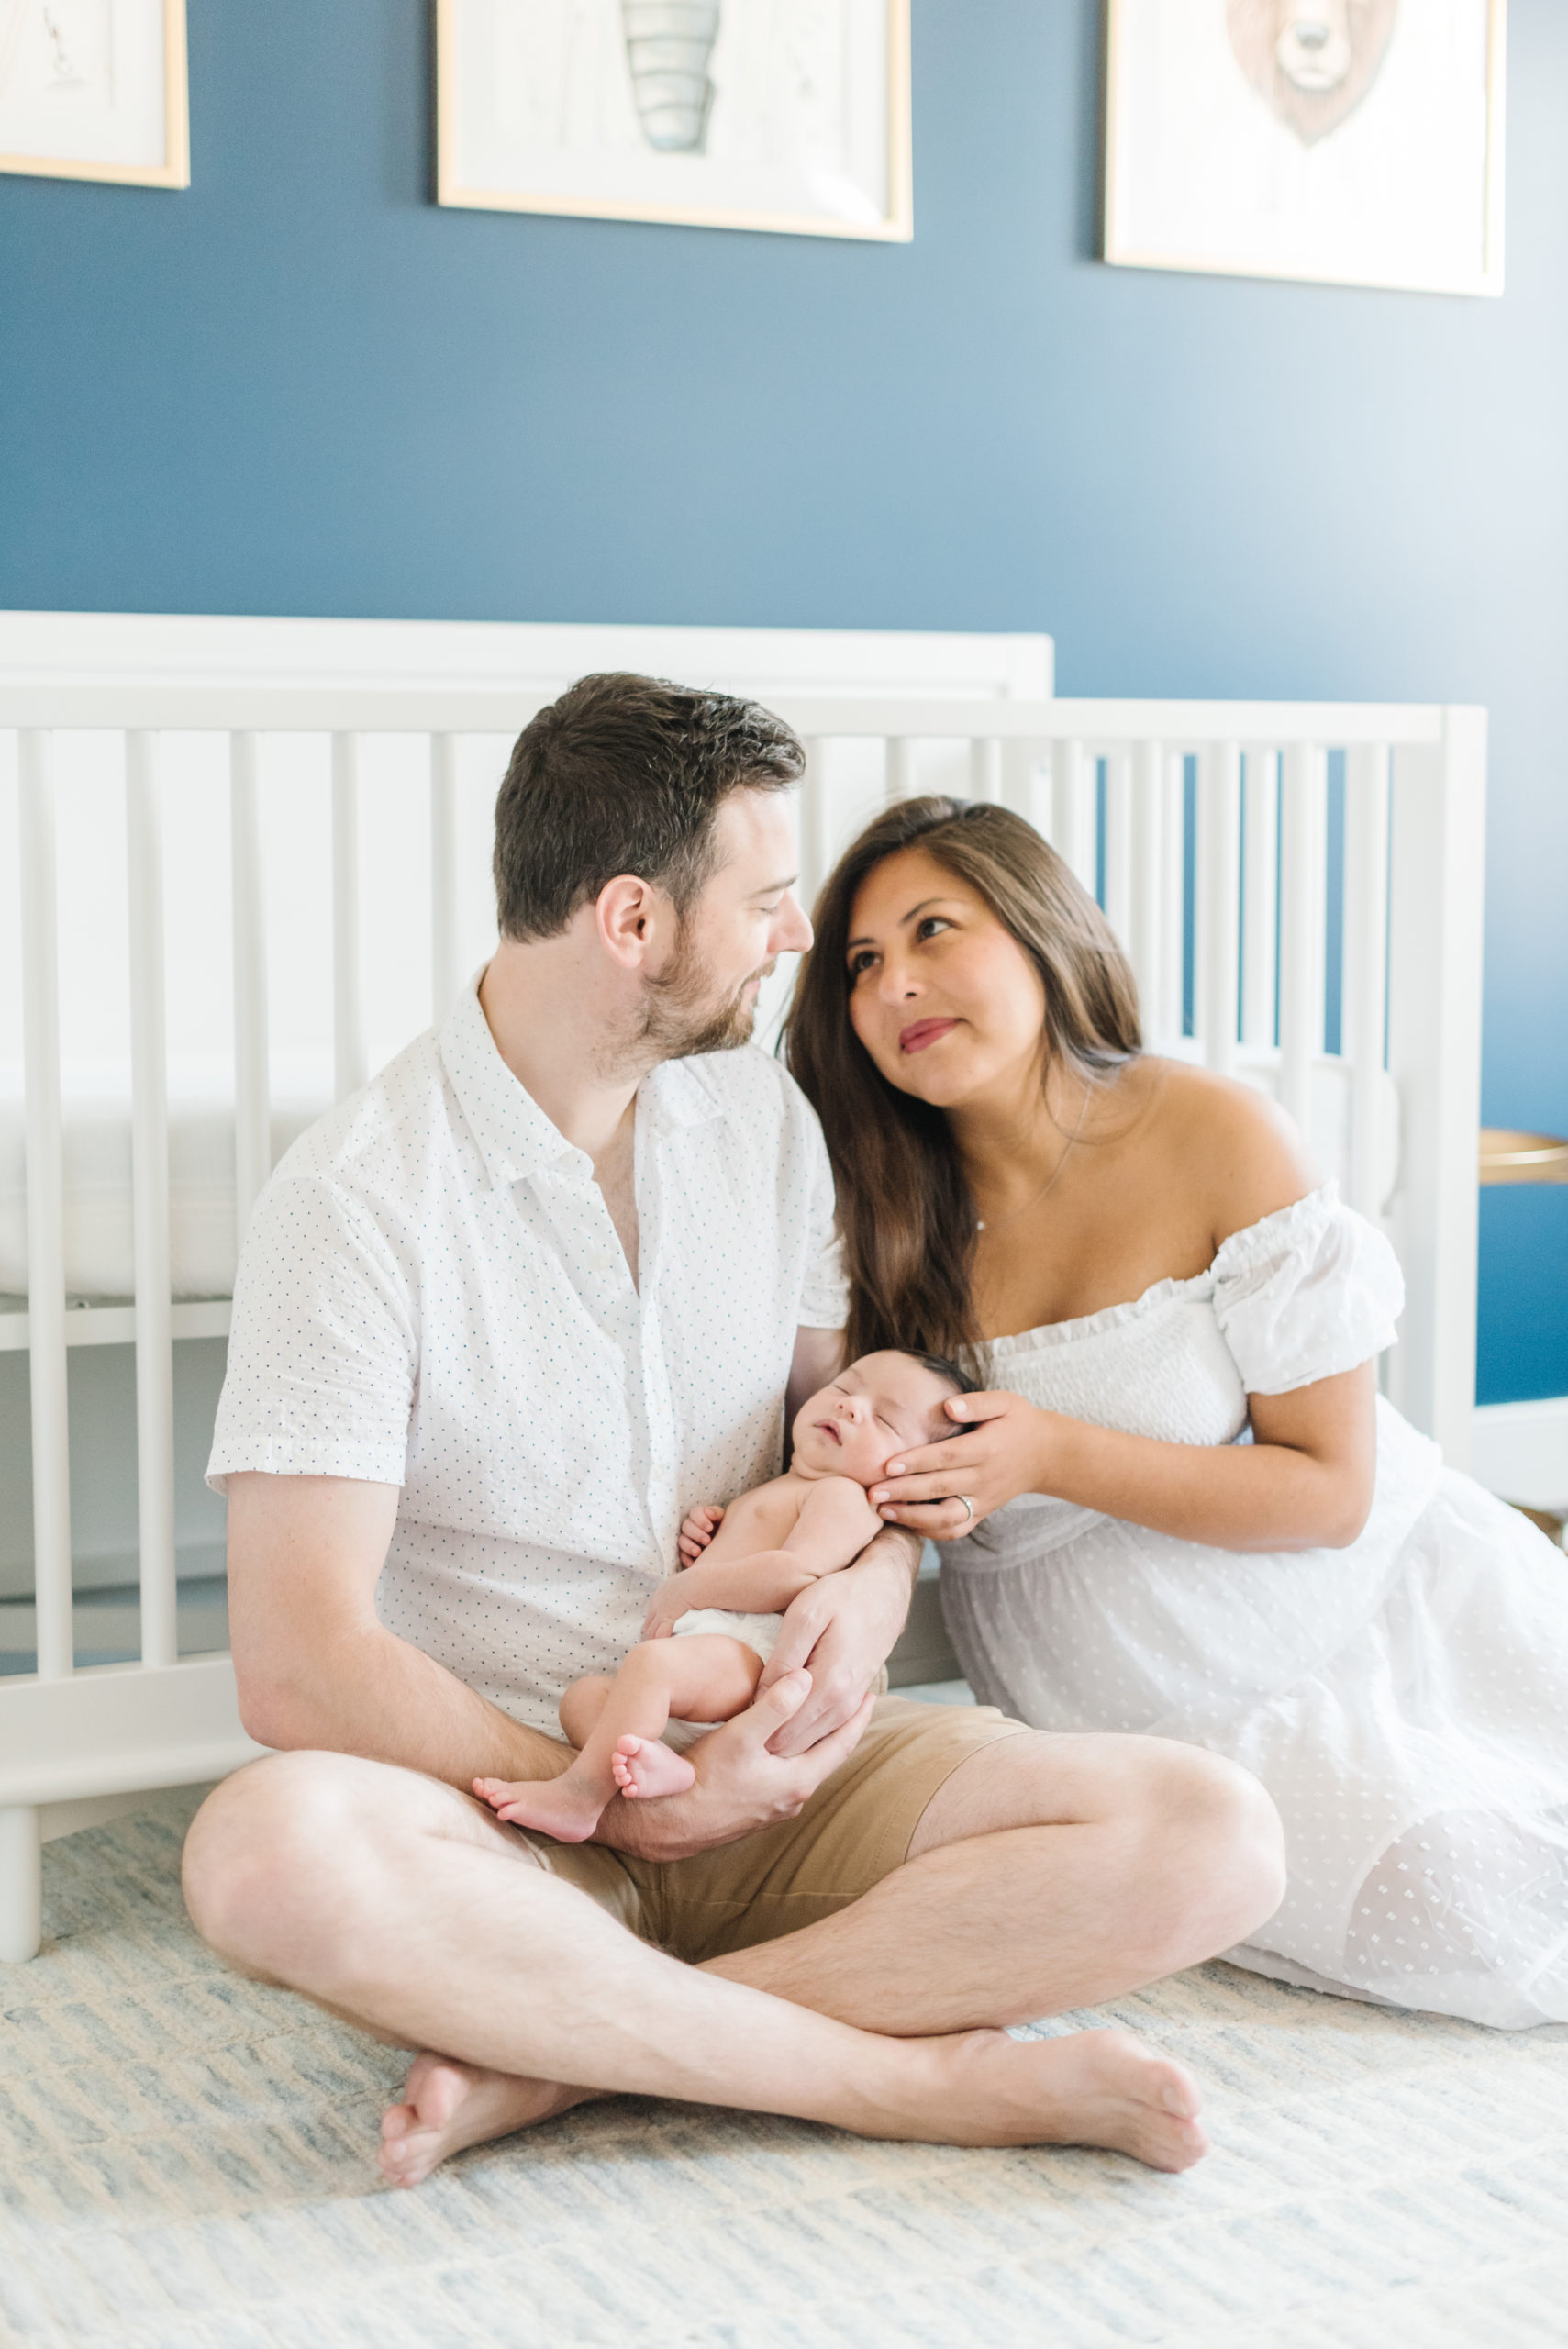 Example of an in-home newborn session.